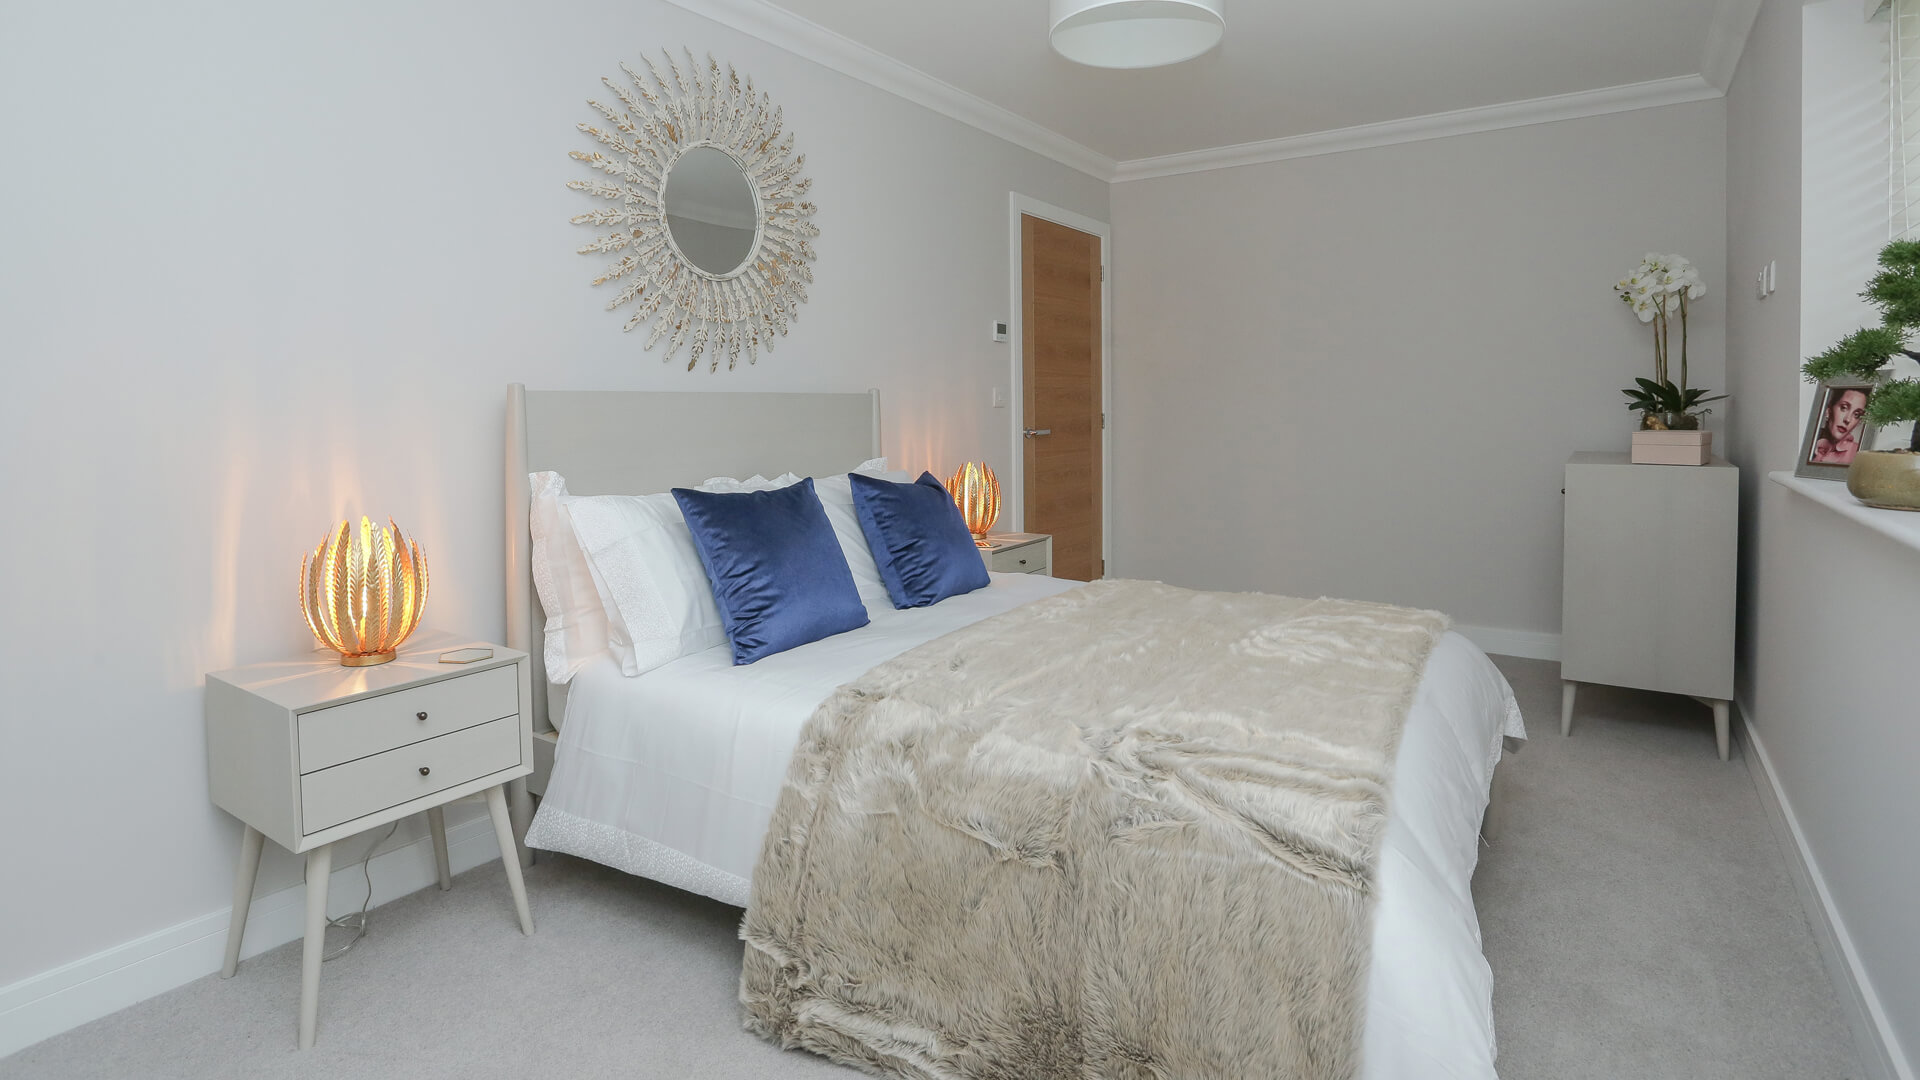 Dressed double master bedroom at Churchfields.